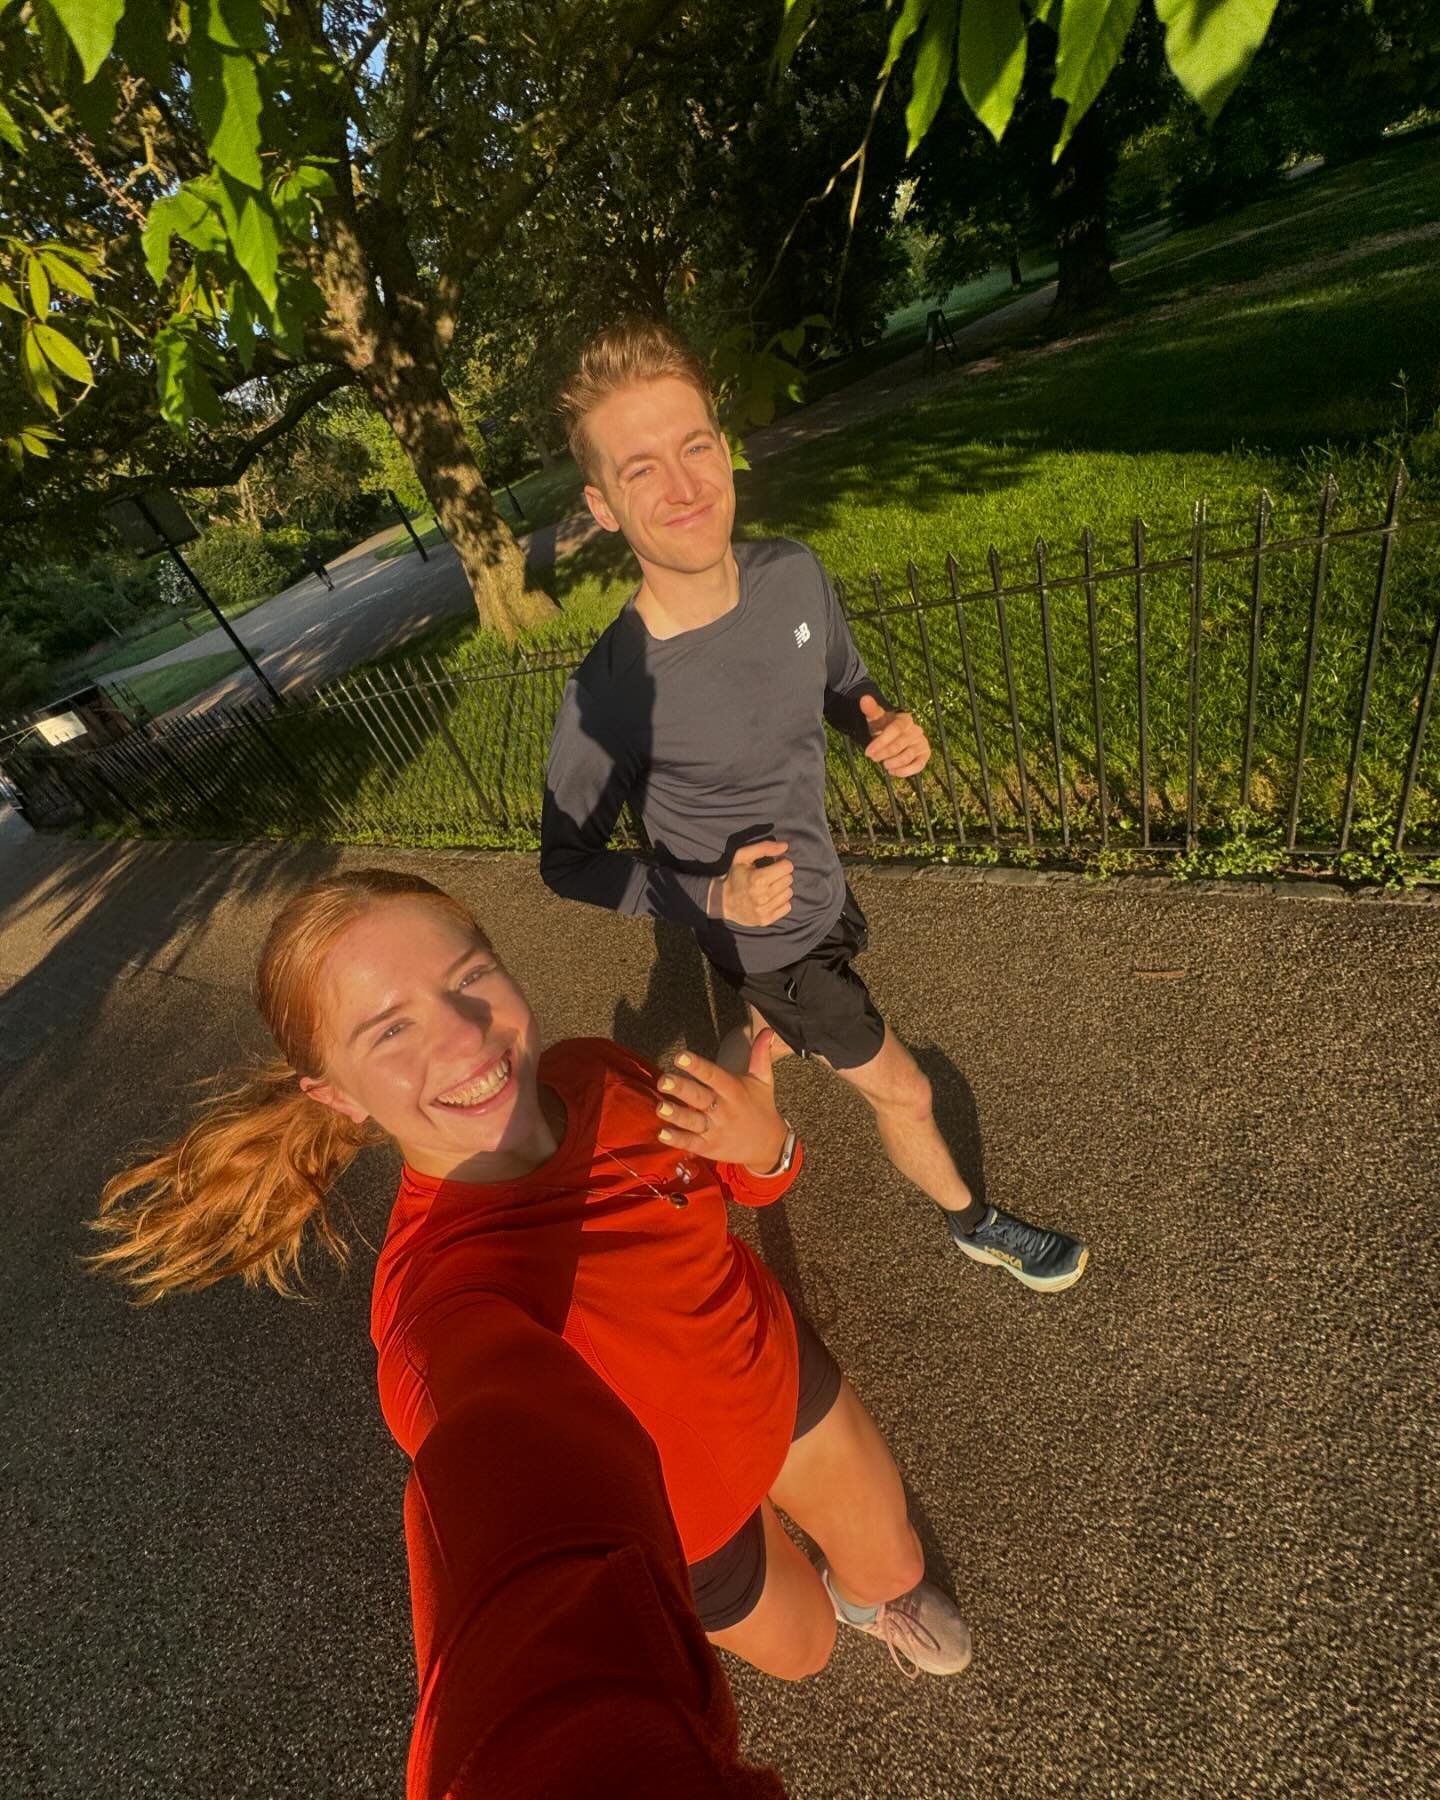 My favourite run ever 💍🥹

A 5:30am sunrise run around London with my best friend with the most amazing surprise about a mile in 🩷

And of course I was wearing @sweatybetty when we got engaged 😂

So so happy!!!!
Lots of love, 
Molly xxx